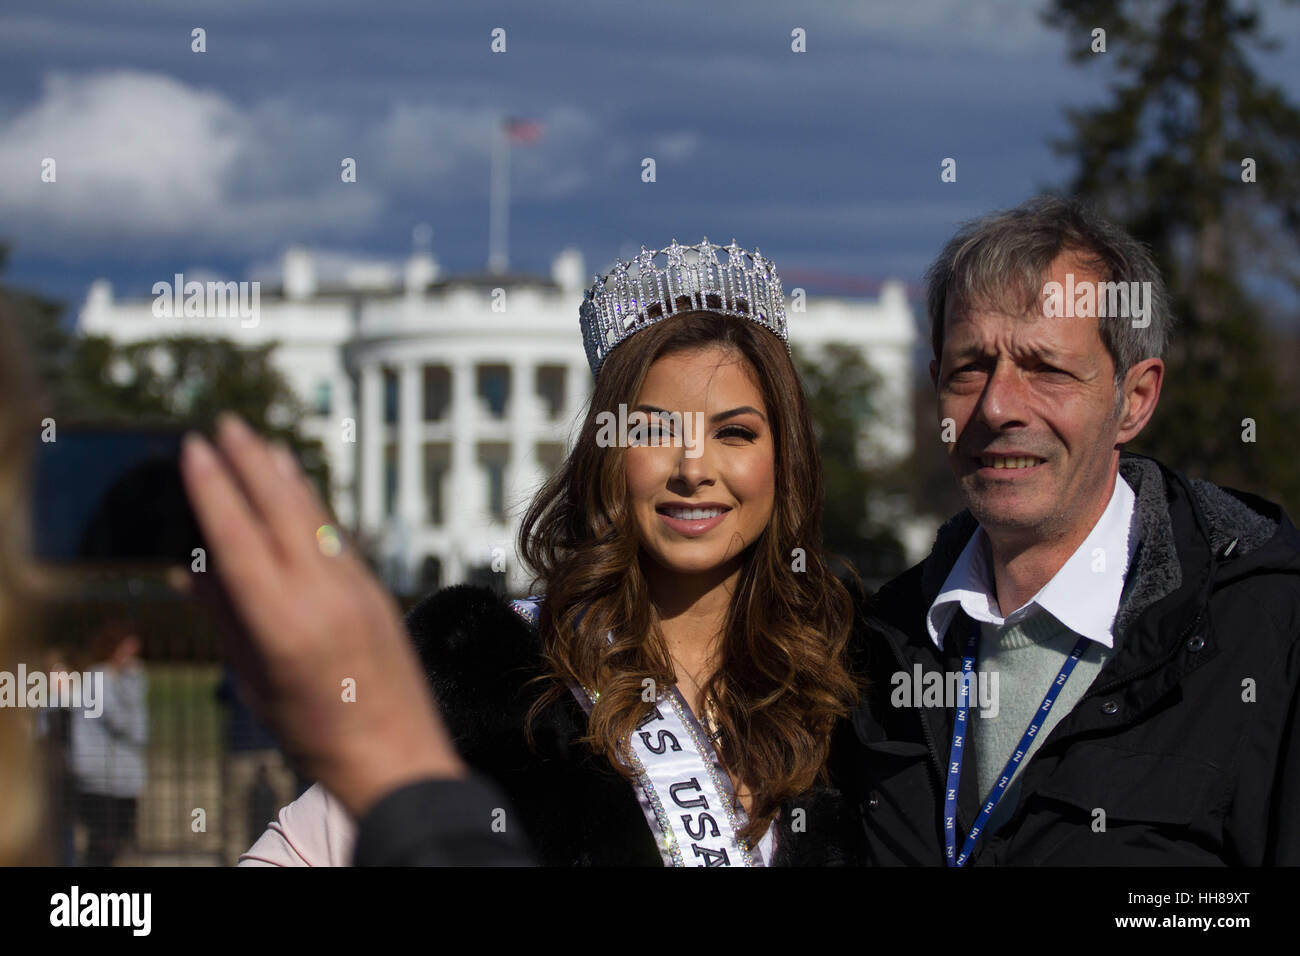 Washington DC, USA. 18th January 2017. Miss Texas USA 2017 Nancy Gonzalez poses with a tourist in front of the White House, Wednesday, January 18, 2017. Credit: Michael Candelori/Alamy Live News Stock Photo